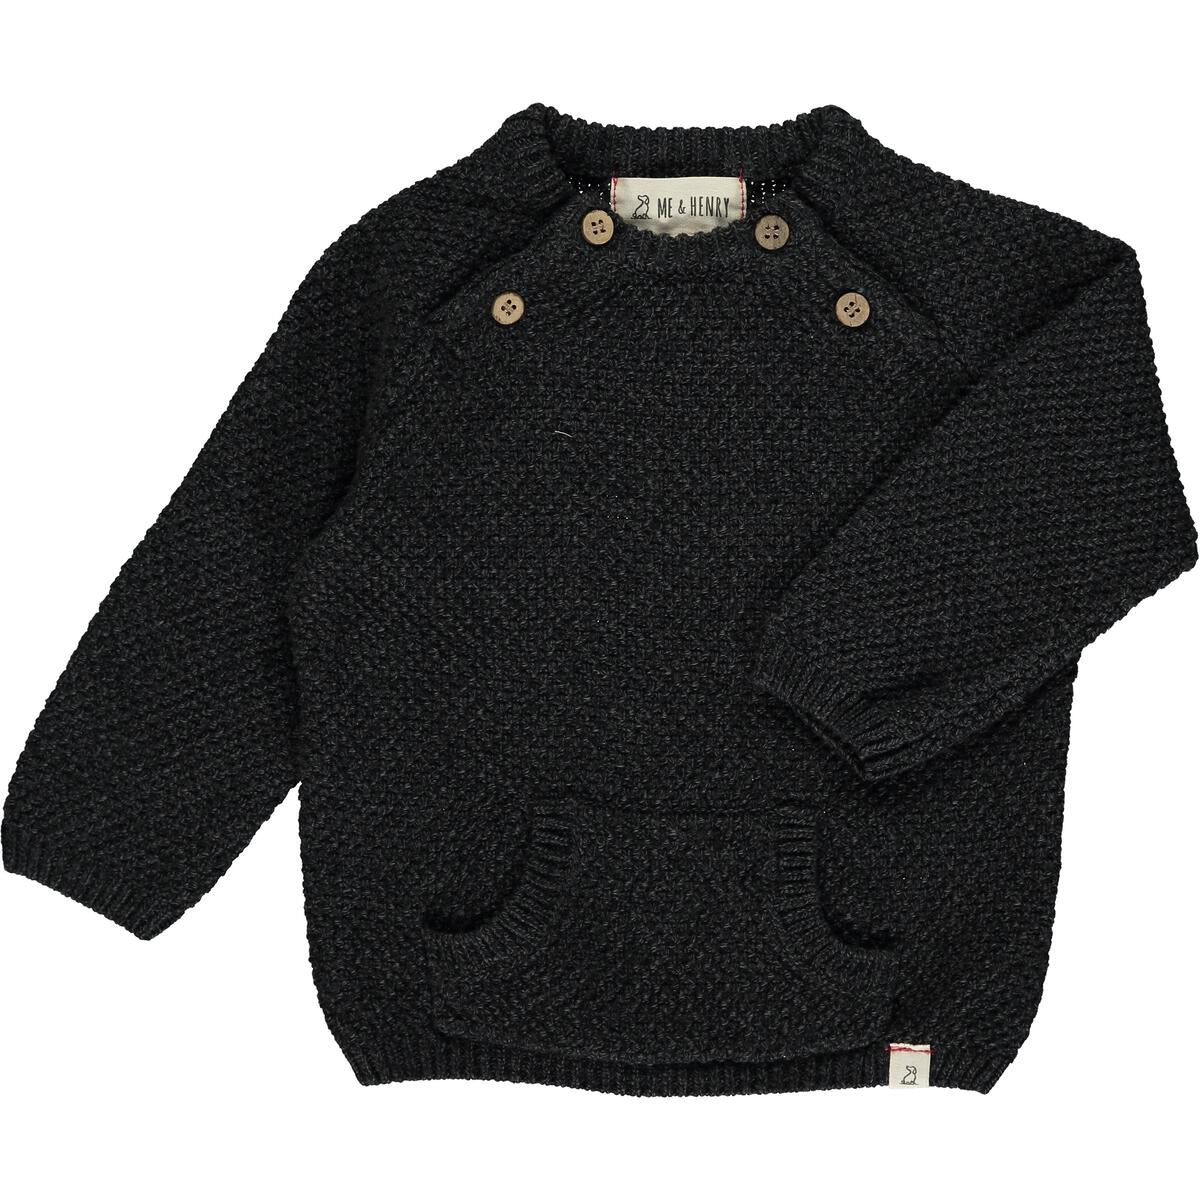 morrison charcoal baby sweater